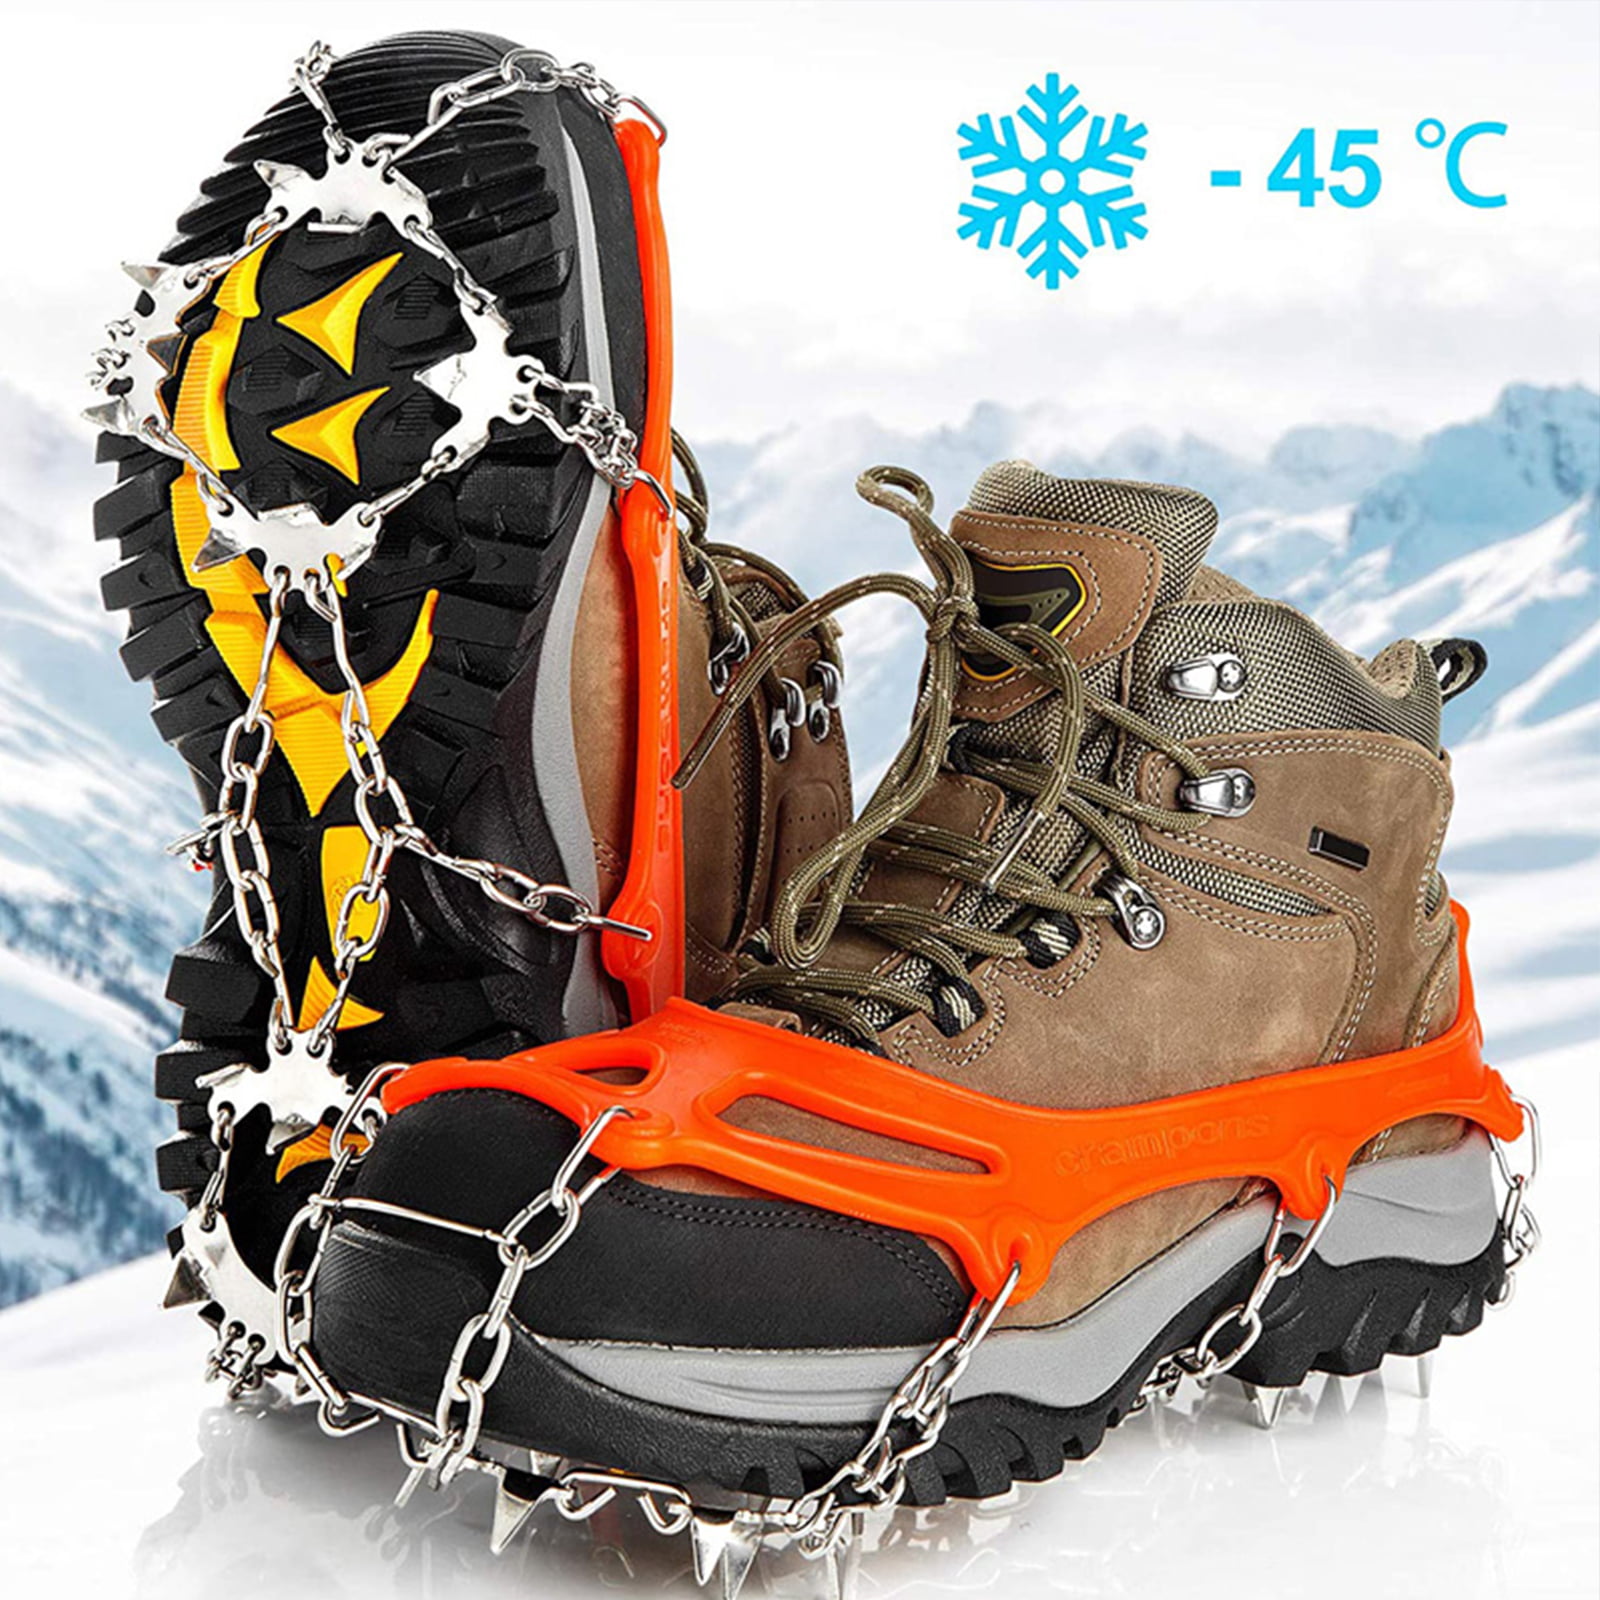 Anti Slip Flexible Shoe/Boot Footwear for Walking Climbing Hiking Fishing Outdoor Sfee Ice Snow Grips Crampons Traction Cleats,19 Stainless Steel Spikes for Women Men Kids 